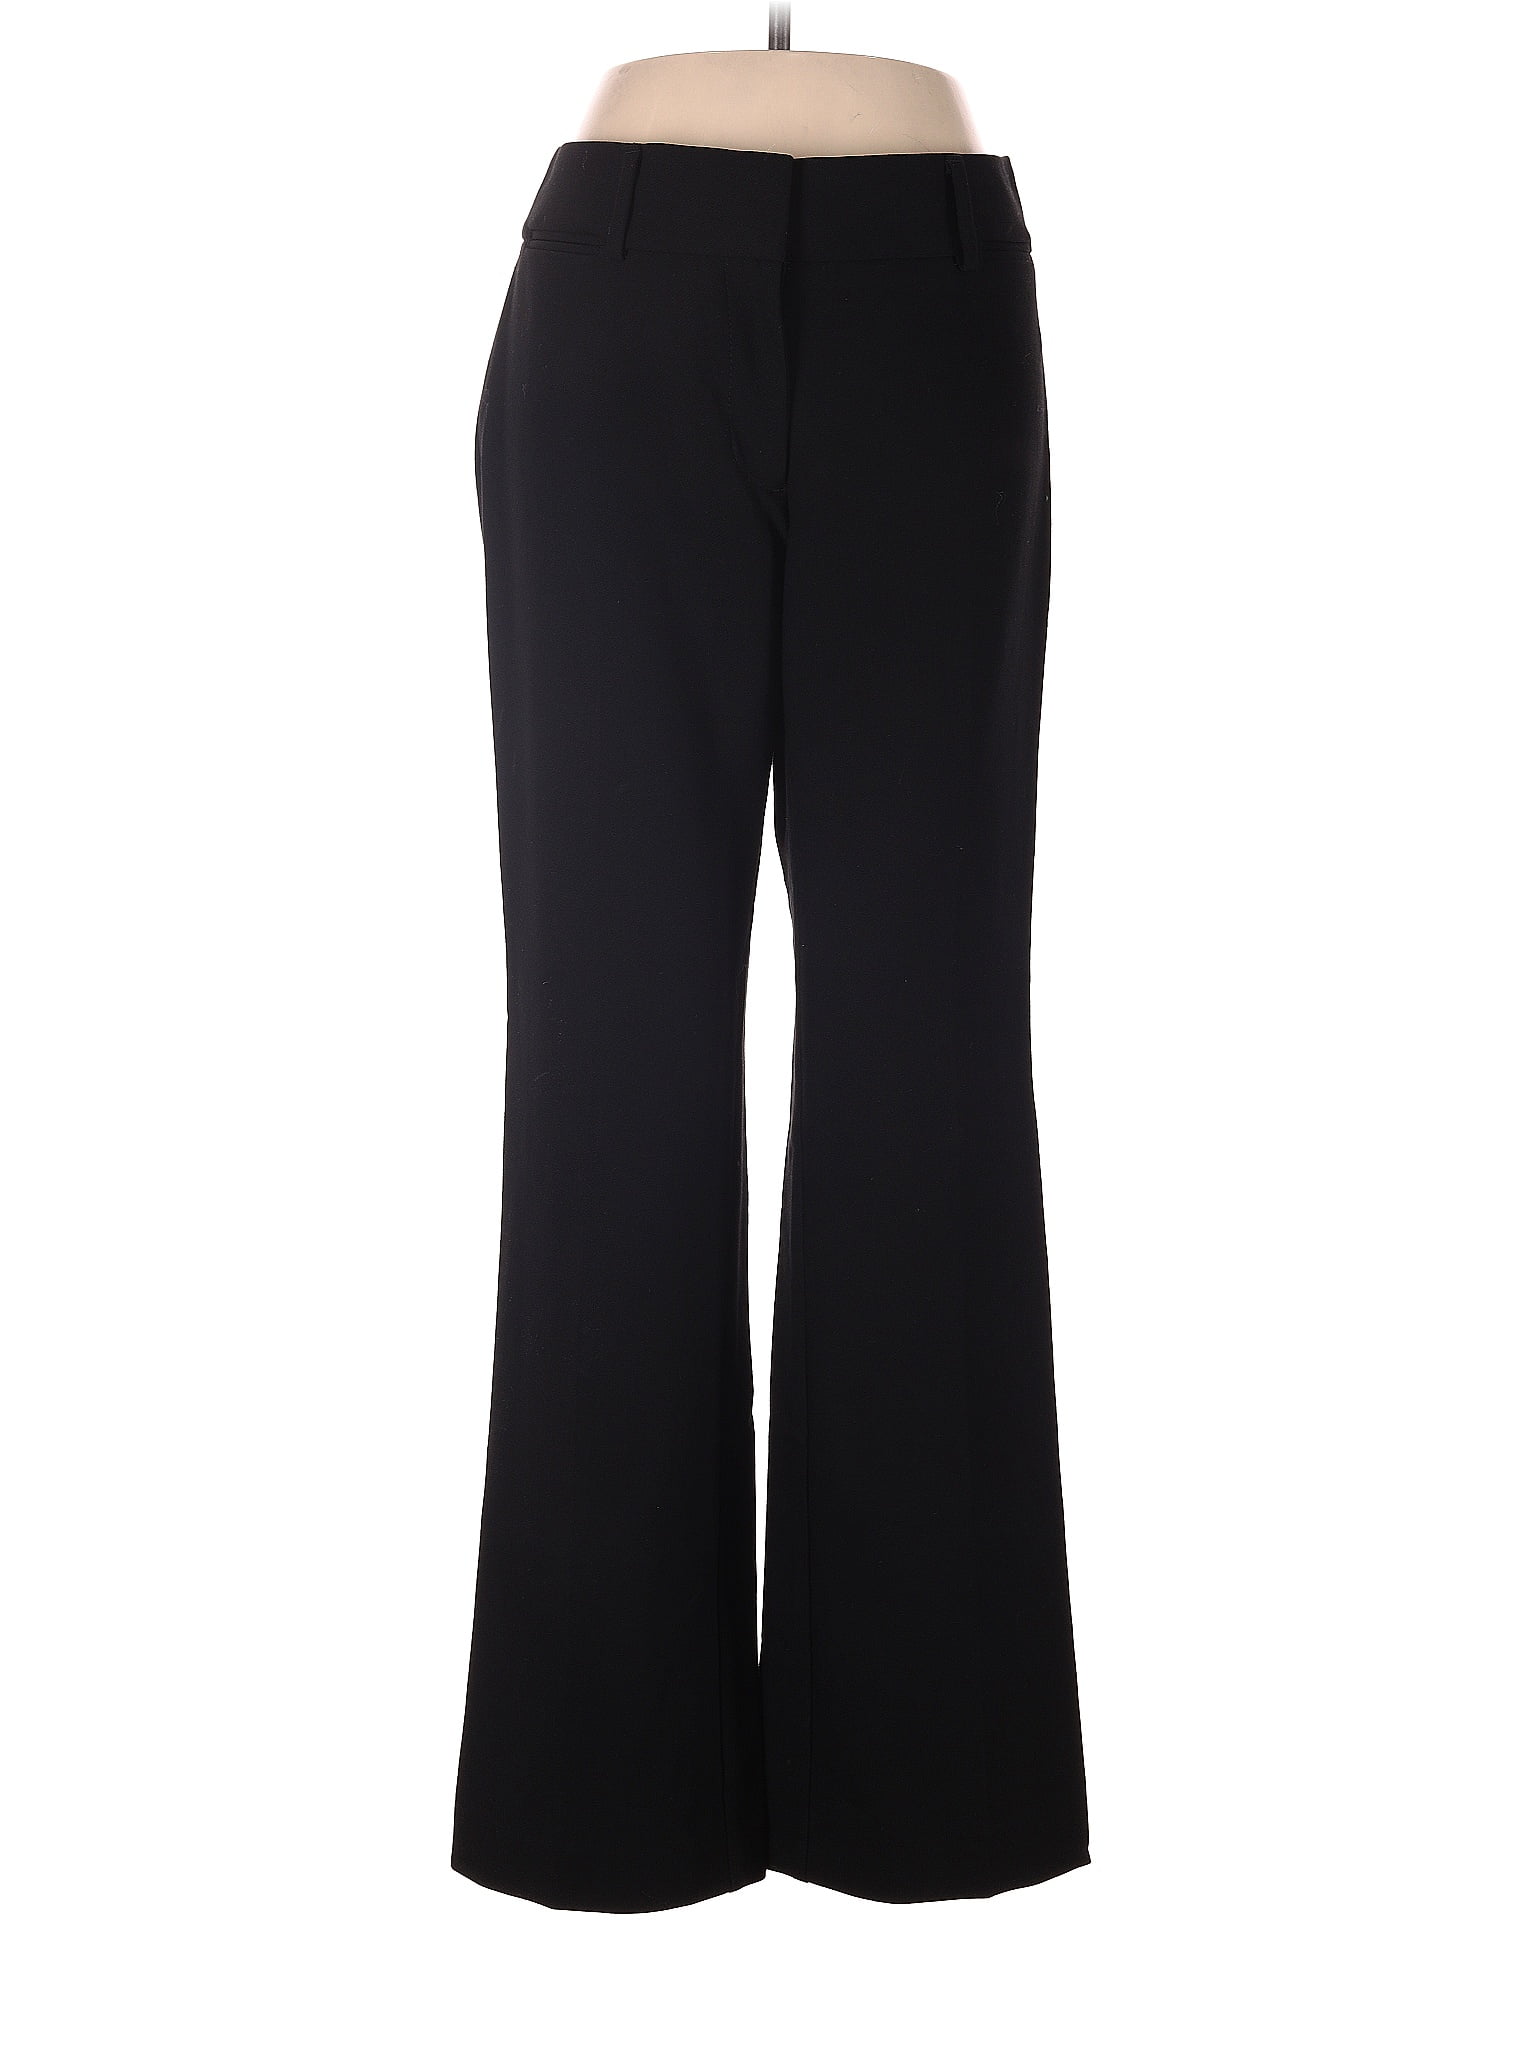 Lee Solid Black Casual Pants Size 8 (Petite) - 64% off